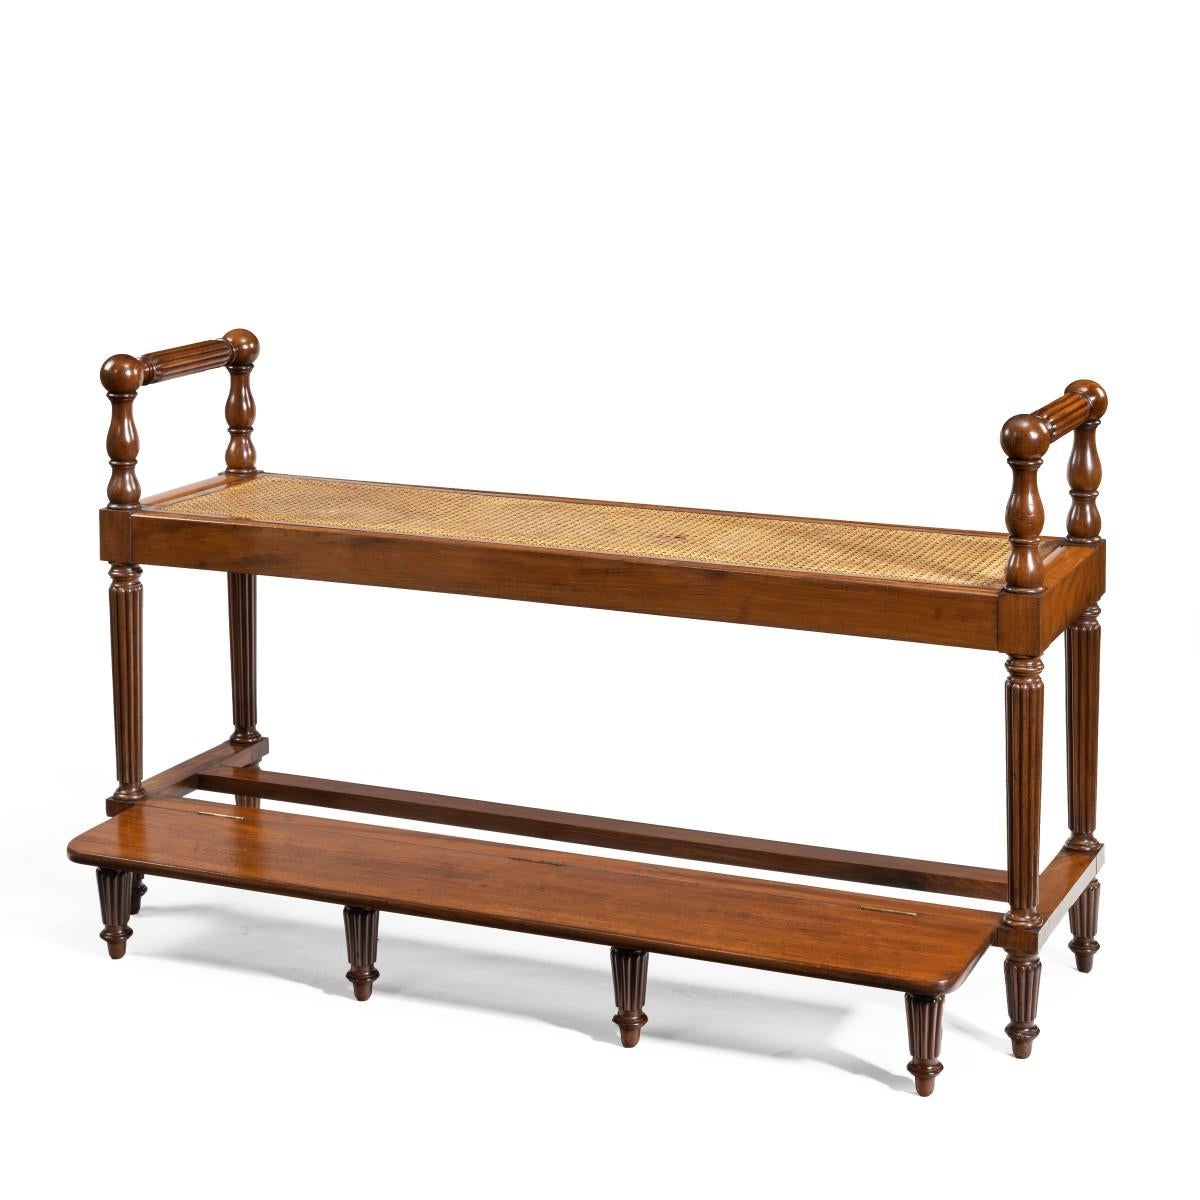 Louis Philippe Mahogany Hall Bench with a Folding Foot-Rest In Good Condition For Sale In Lymington, Hampshire